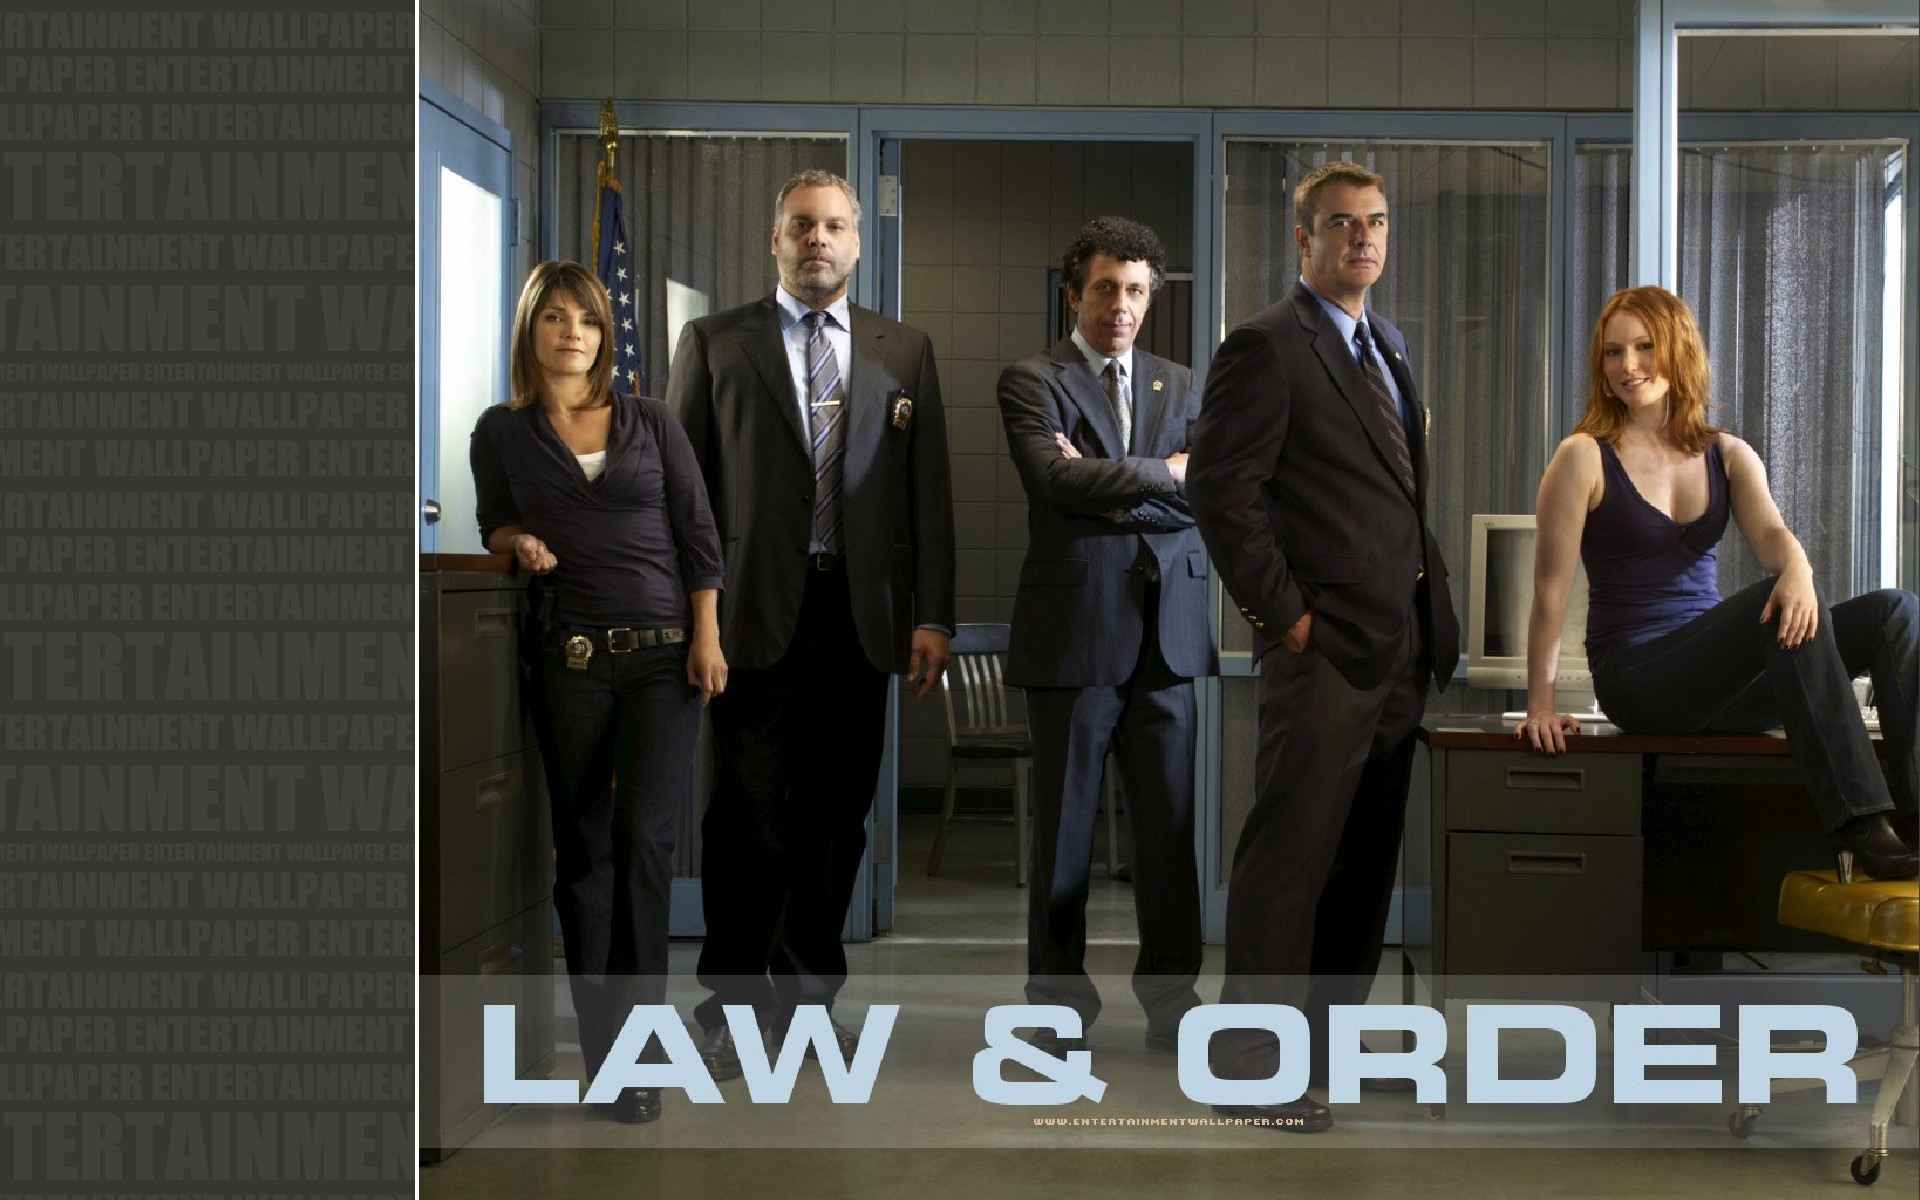 Law & Order: Criminal Intent Wallpapers